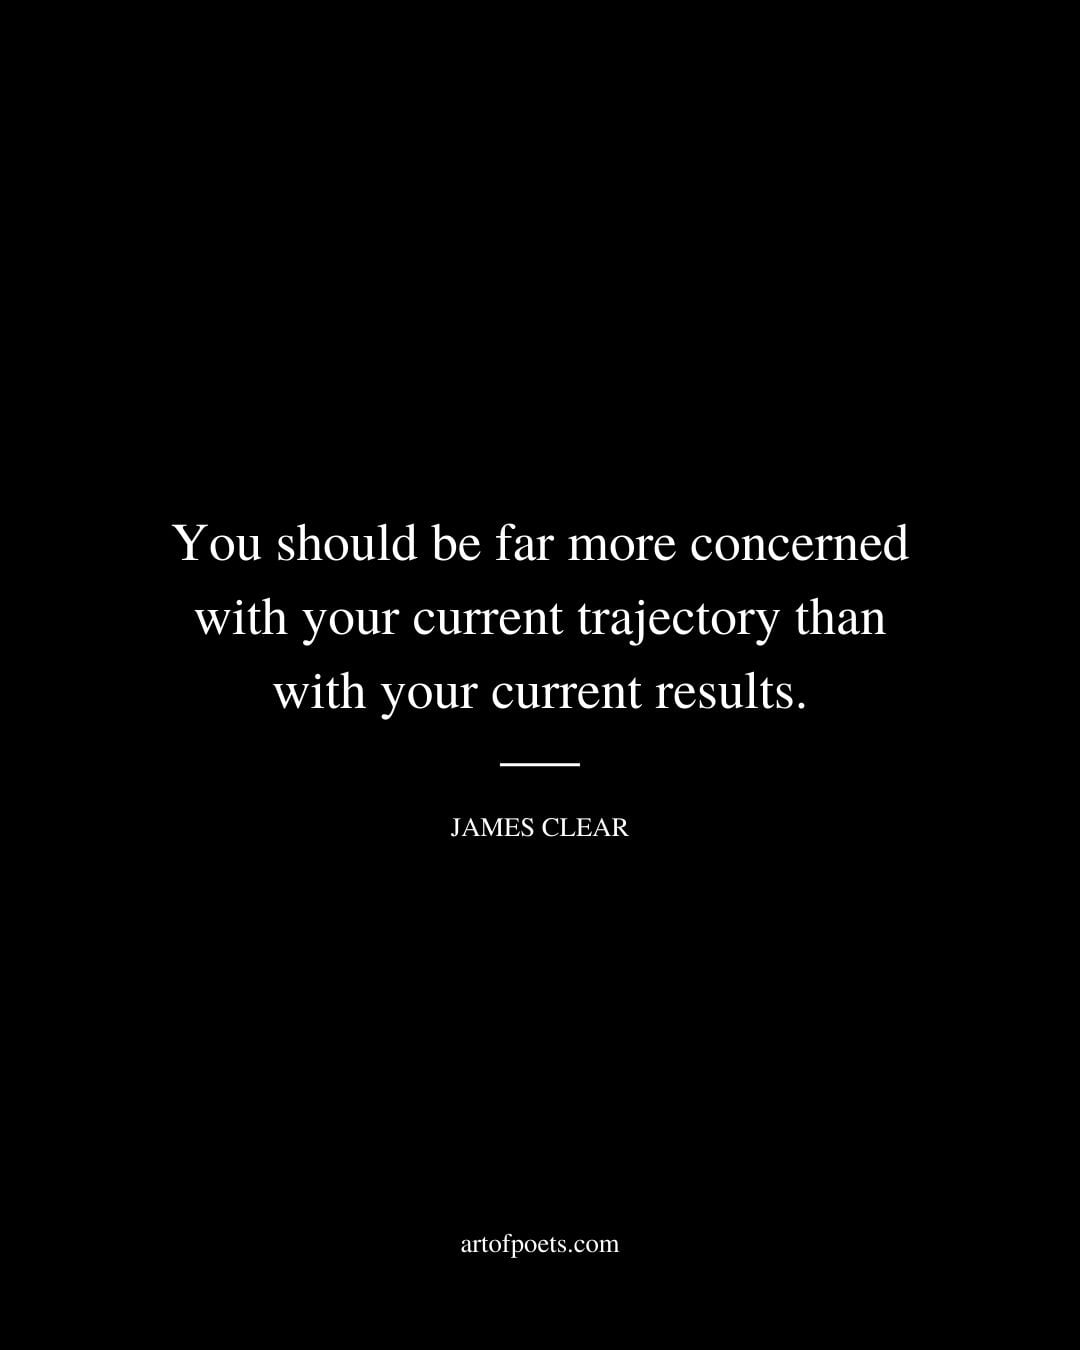 You should be far more concerned with your current trajectory than with your current results